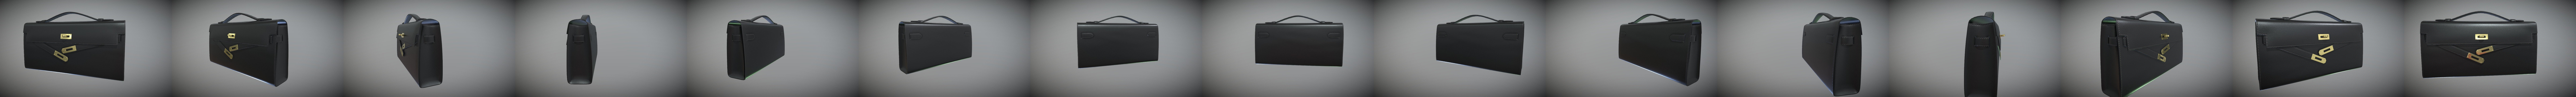 3D Model Collection Hermes Kelly Cut Clutch VR / AR / low-poly